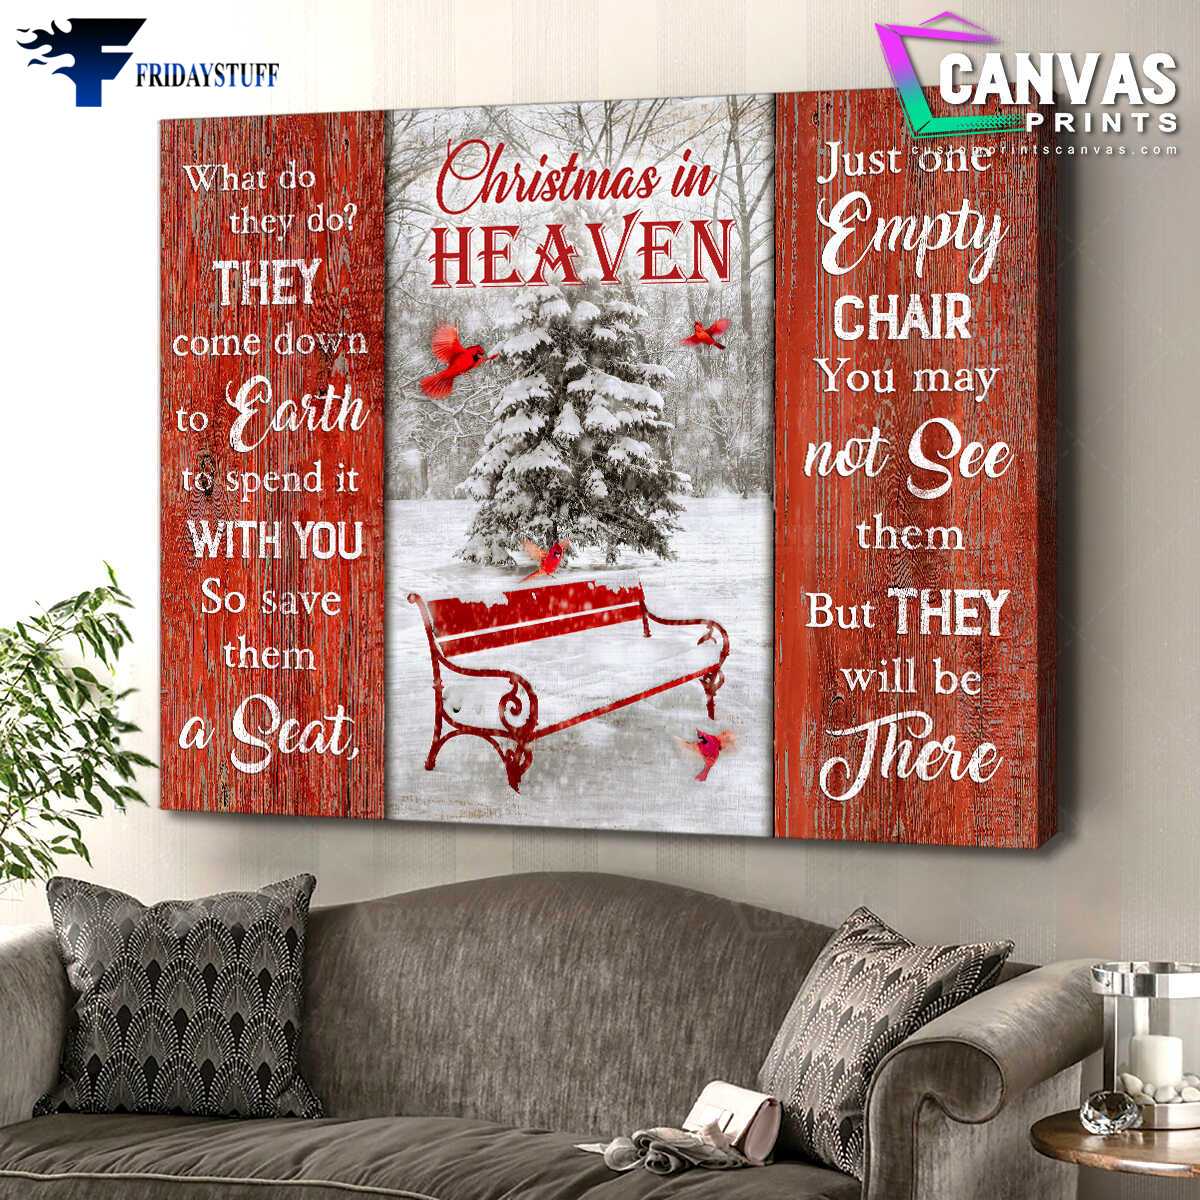 Cardinal Bird, Winter Poster, Christmas Decor, Christmas In Heaven, What Do They Do, They Come Down To Earth, To Spend It With You, So Save Them A Seat, Just One Empty Chair